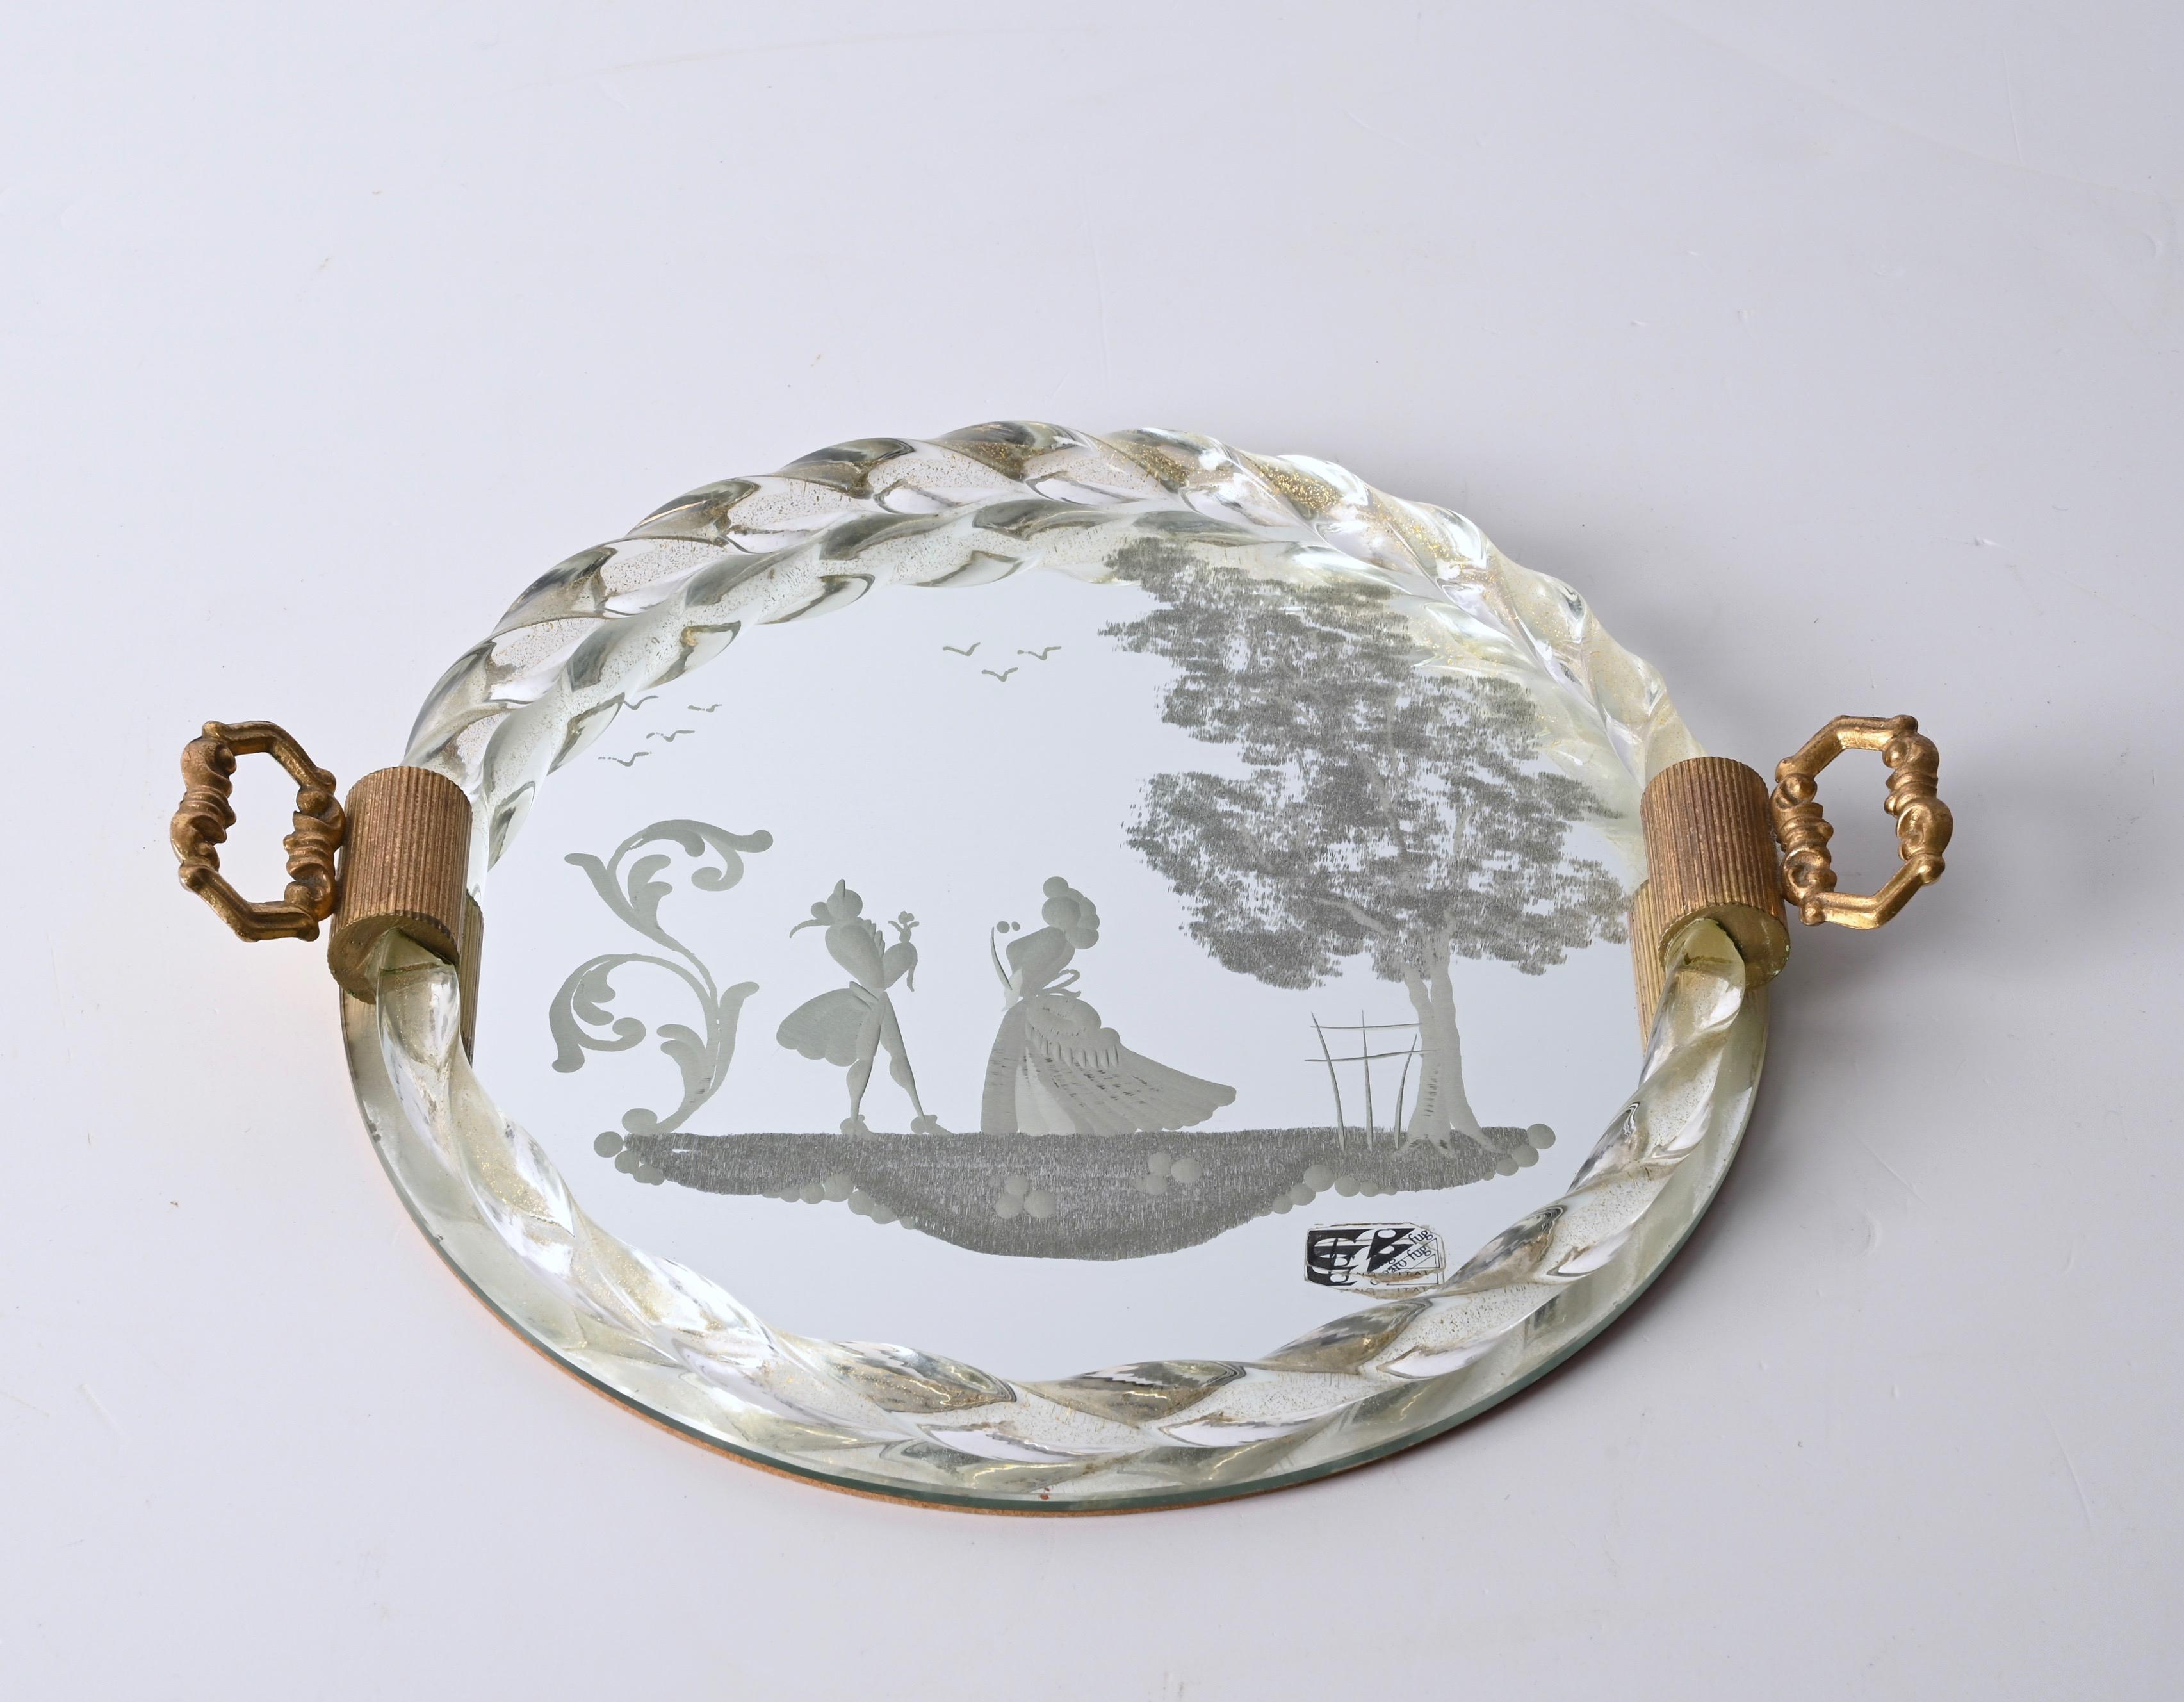 Ongaro e Fuga Gilded Engraved Mirror and Murano Glass Italian Serving Tray 1950s For Sale 2